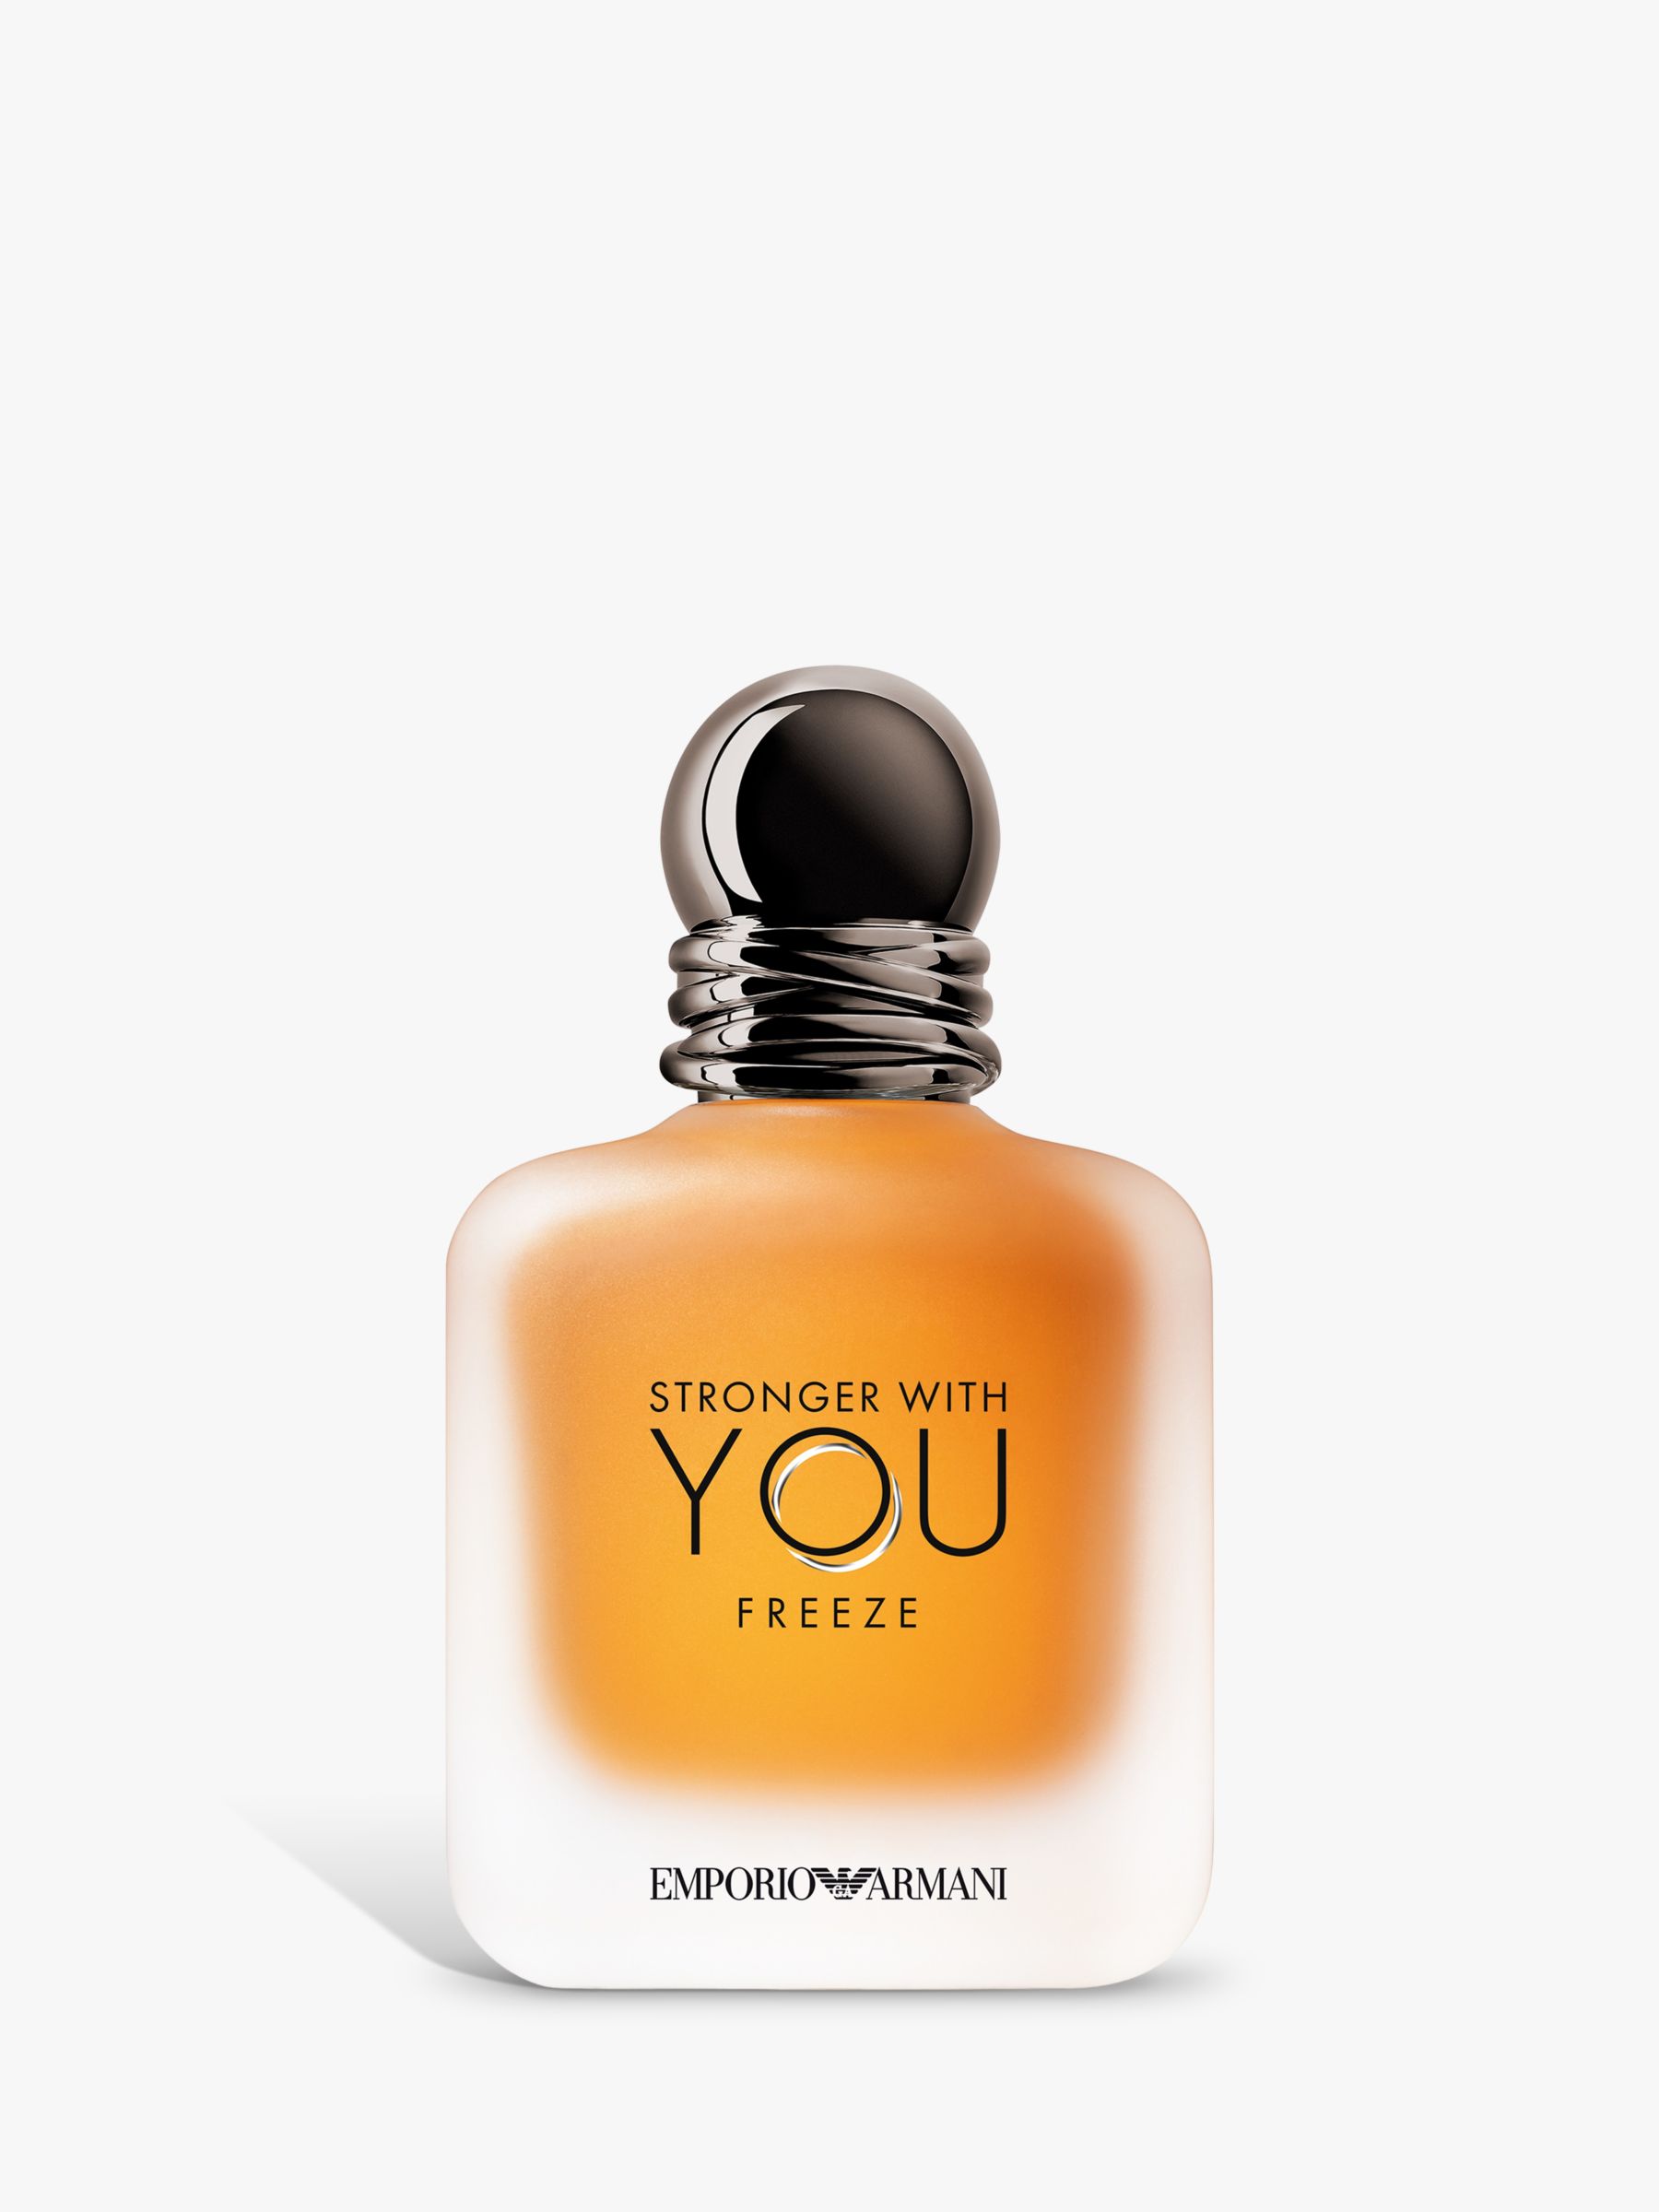 giorgio armani stronger with you review